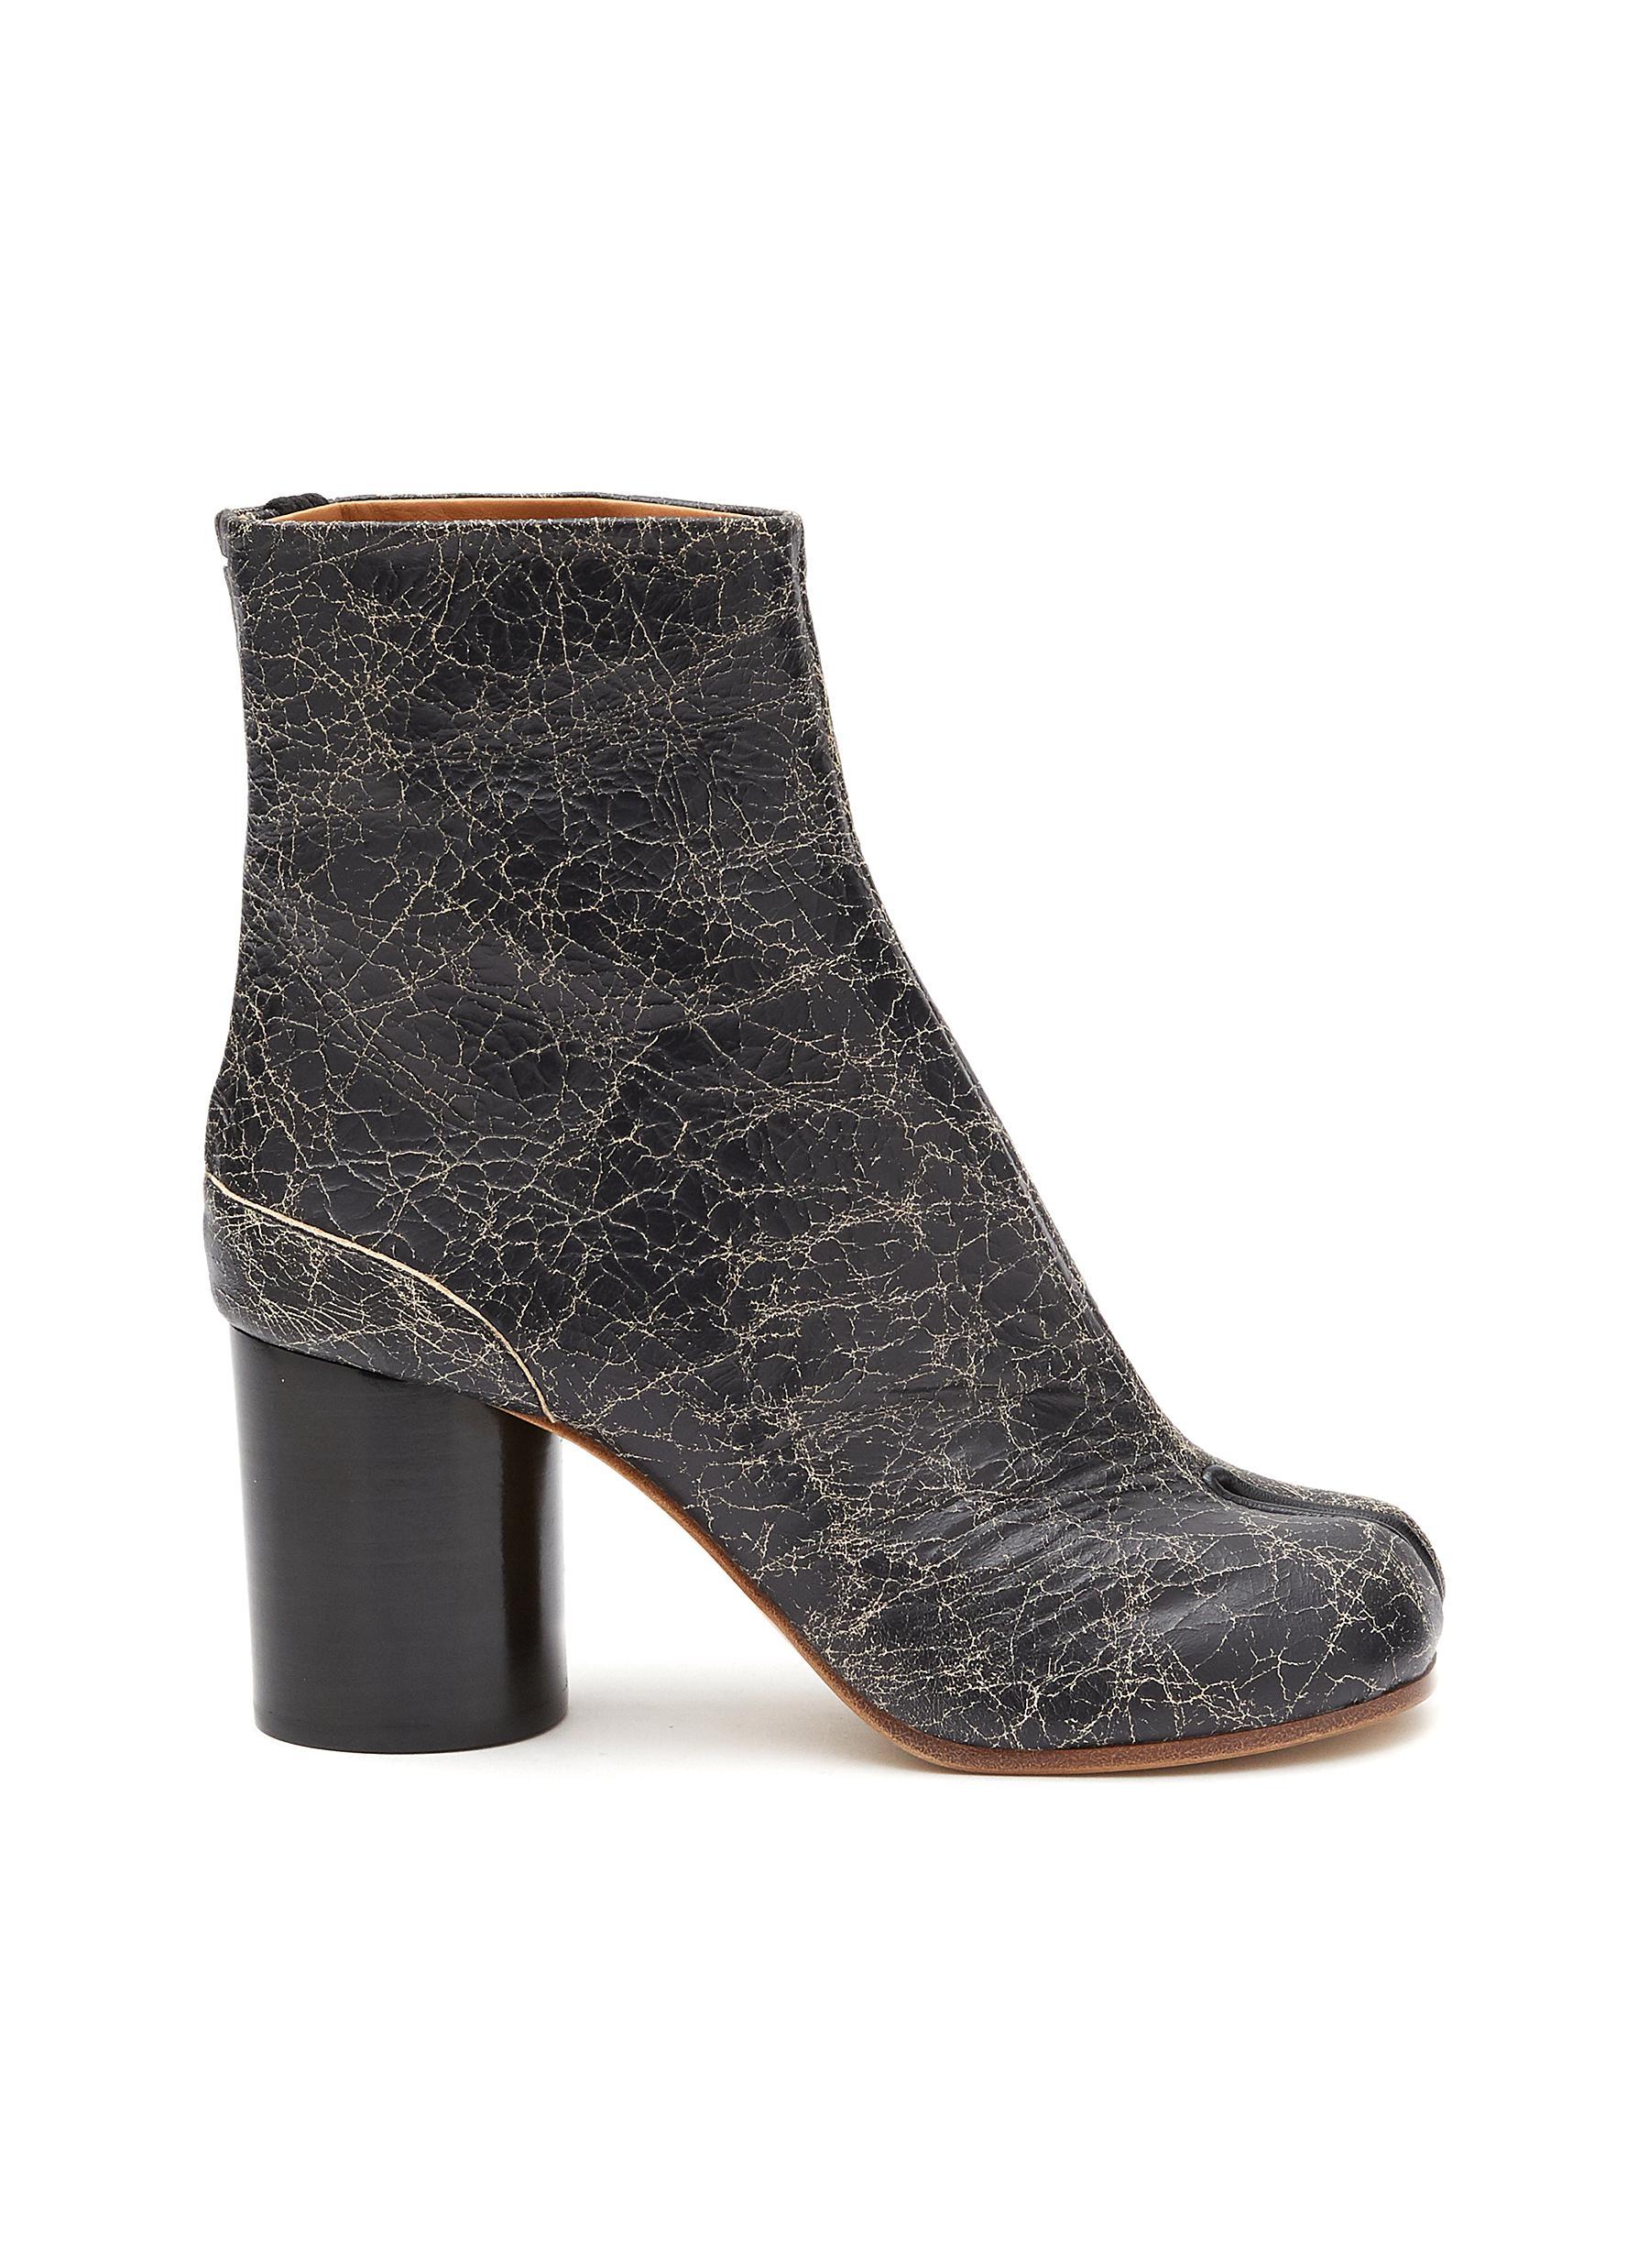 Maison Margiela 'tabi' 80 Cracked Leather Heeled Boots in Gray | Lyst